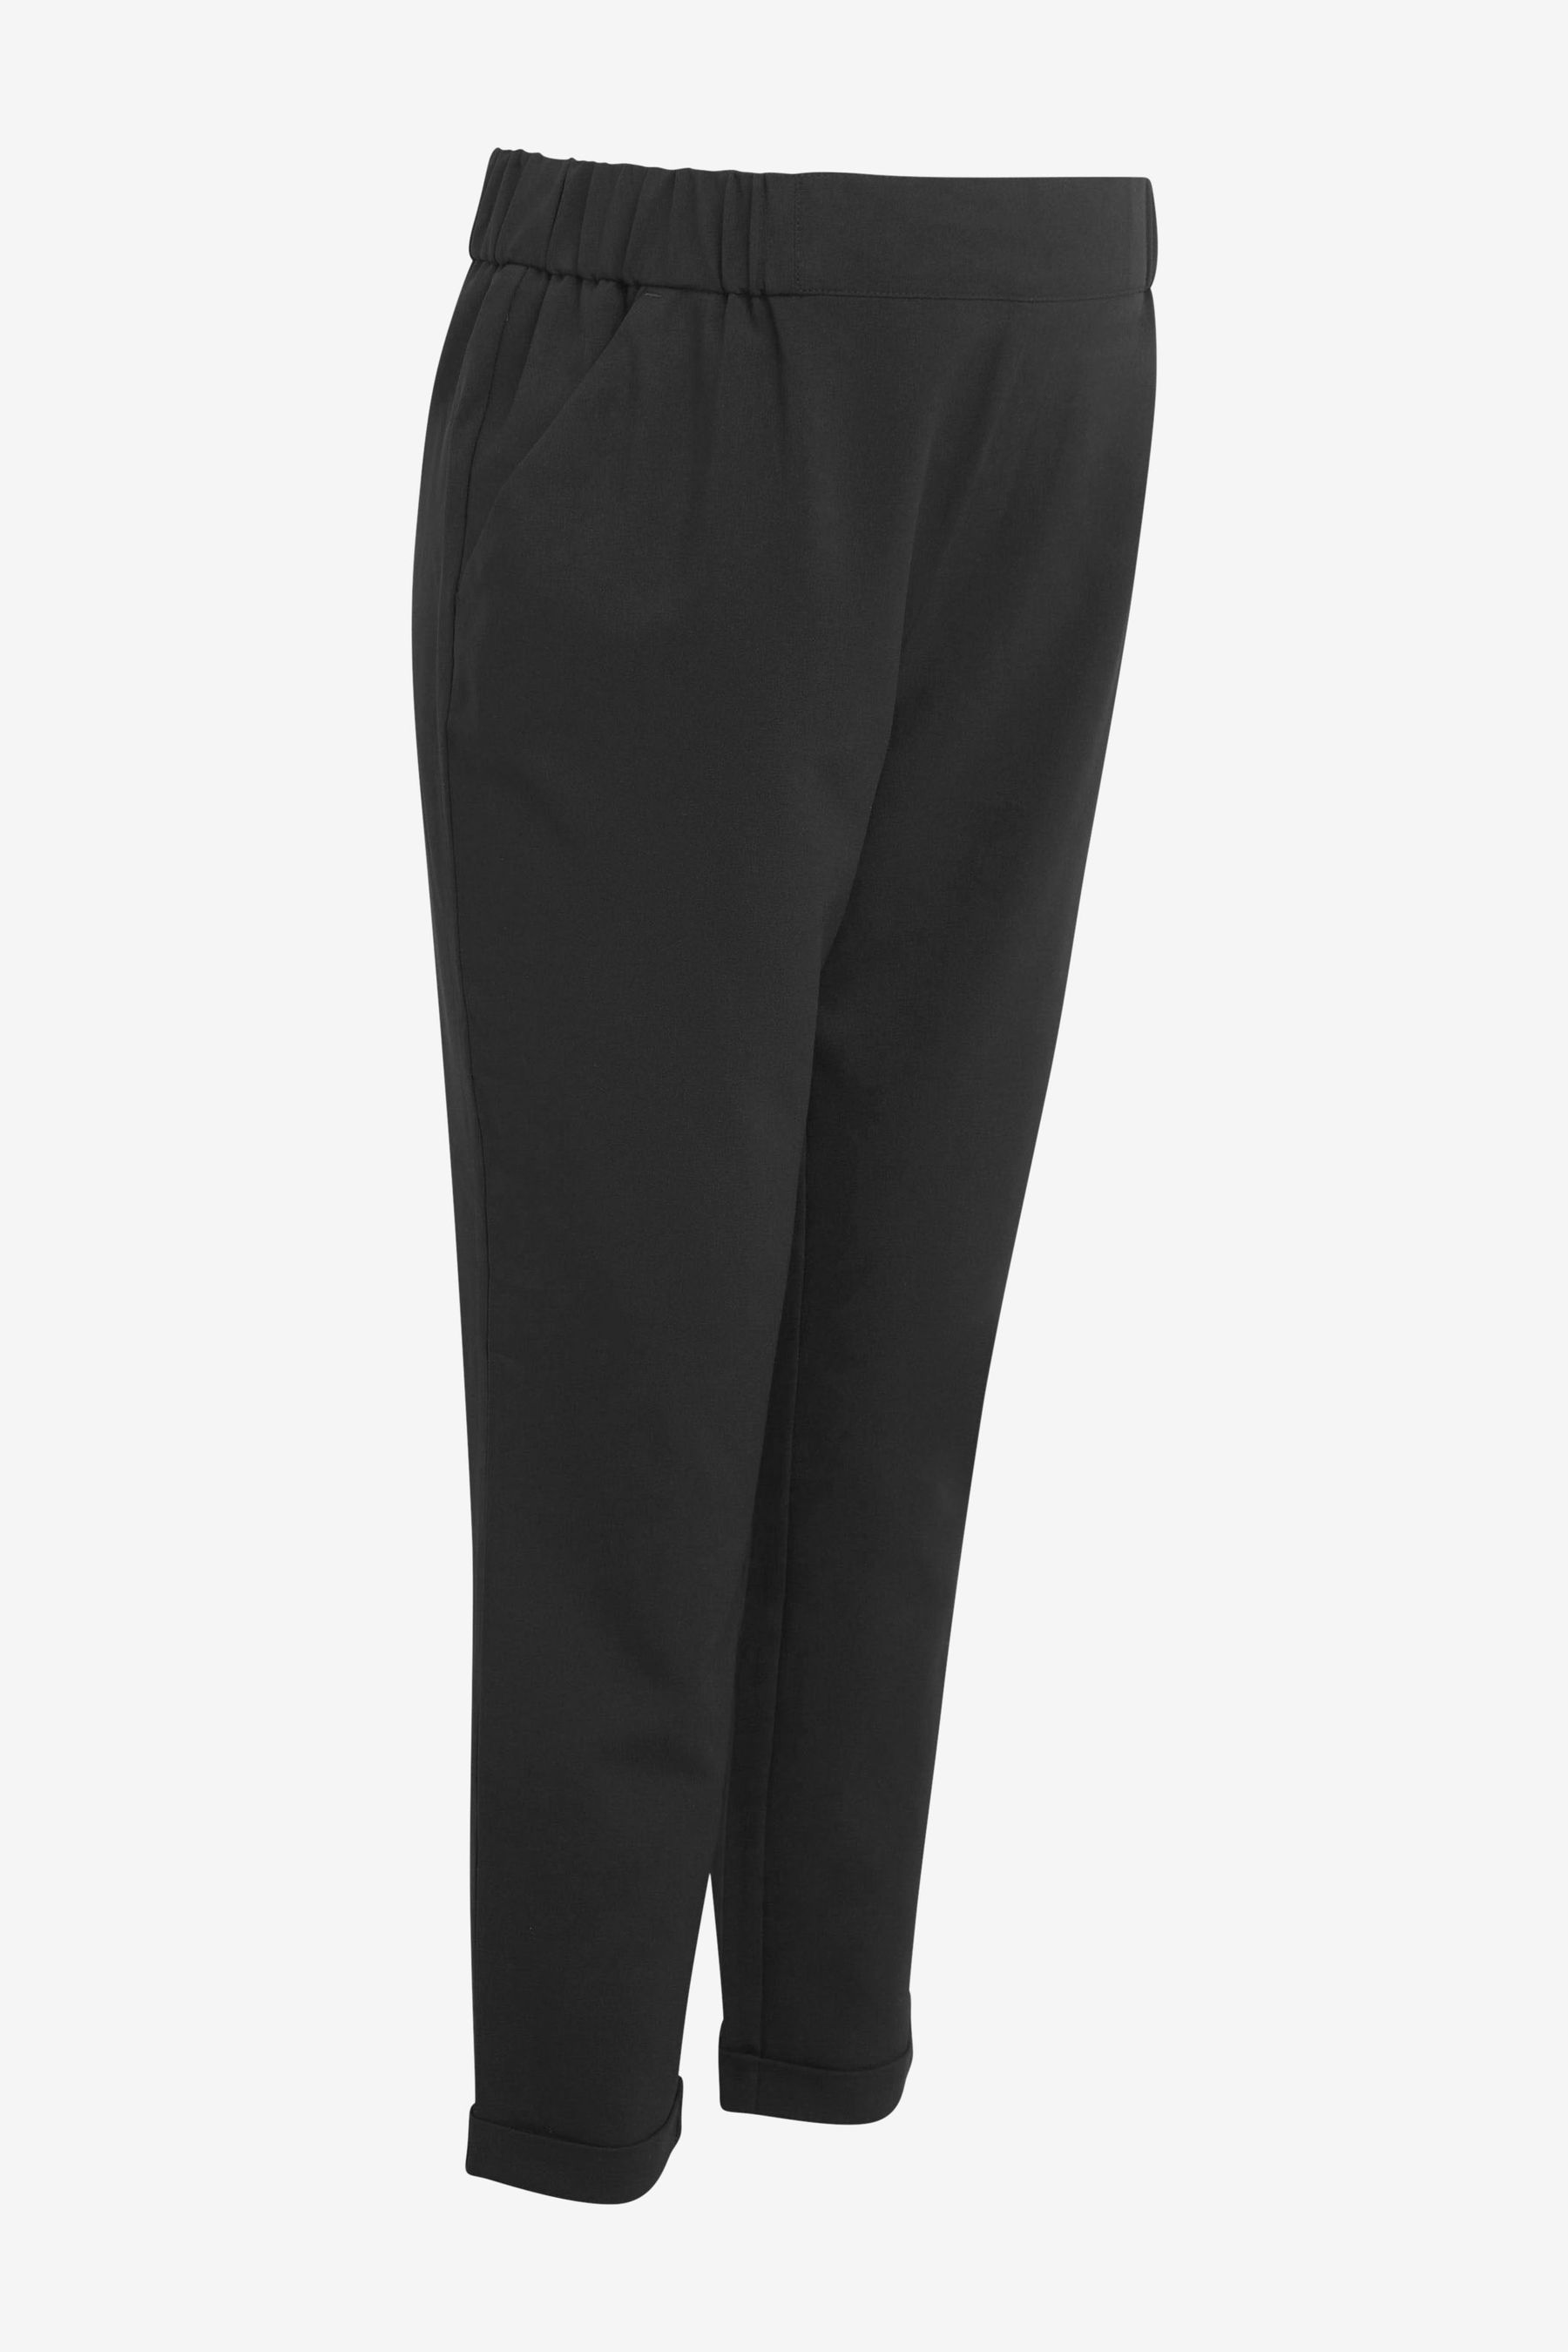 Buy Black Maternity Tapered Trousers from the Next UK online shop